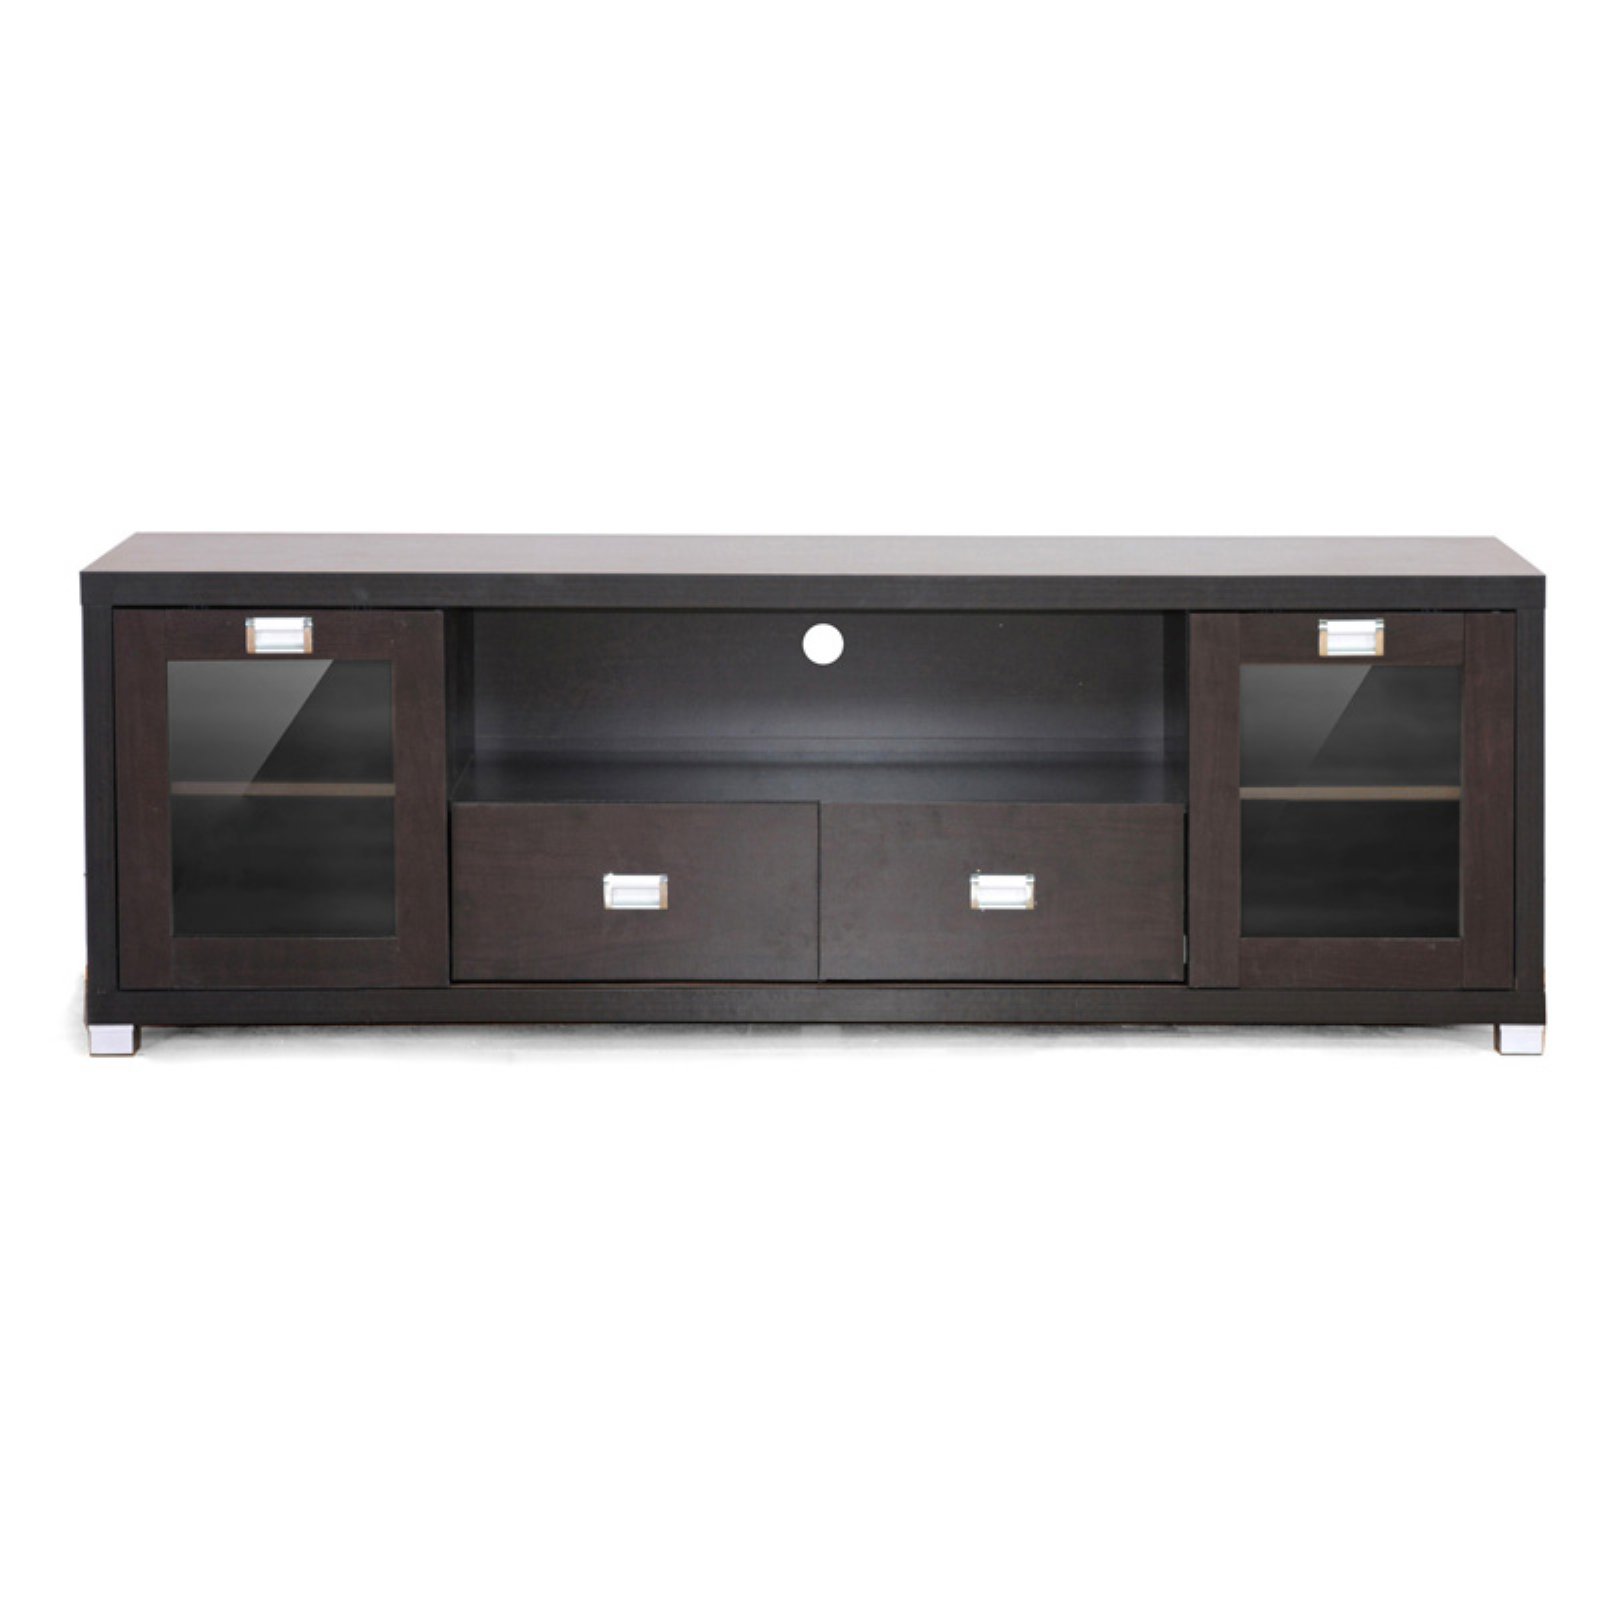 Baxton Studio Gosford TV Stand in Brown - image 2 of 3